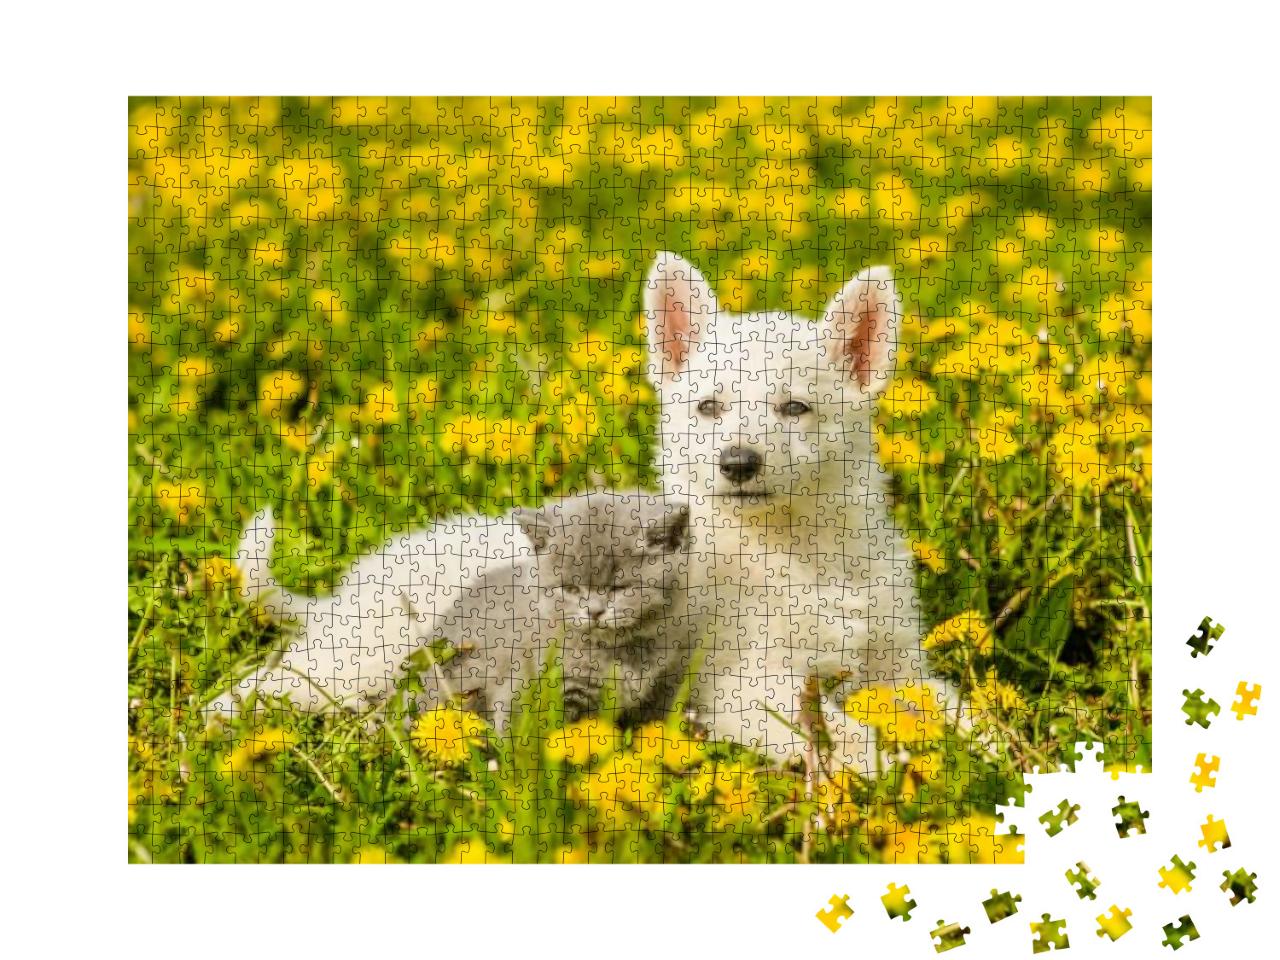 Puppy & Kitten Lying Together on a Dandelion Field... Jigsaw Puzzle with 1000 pieces